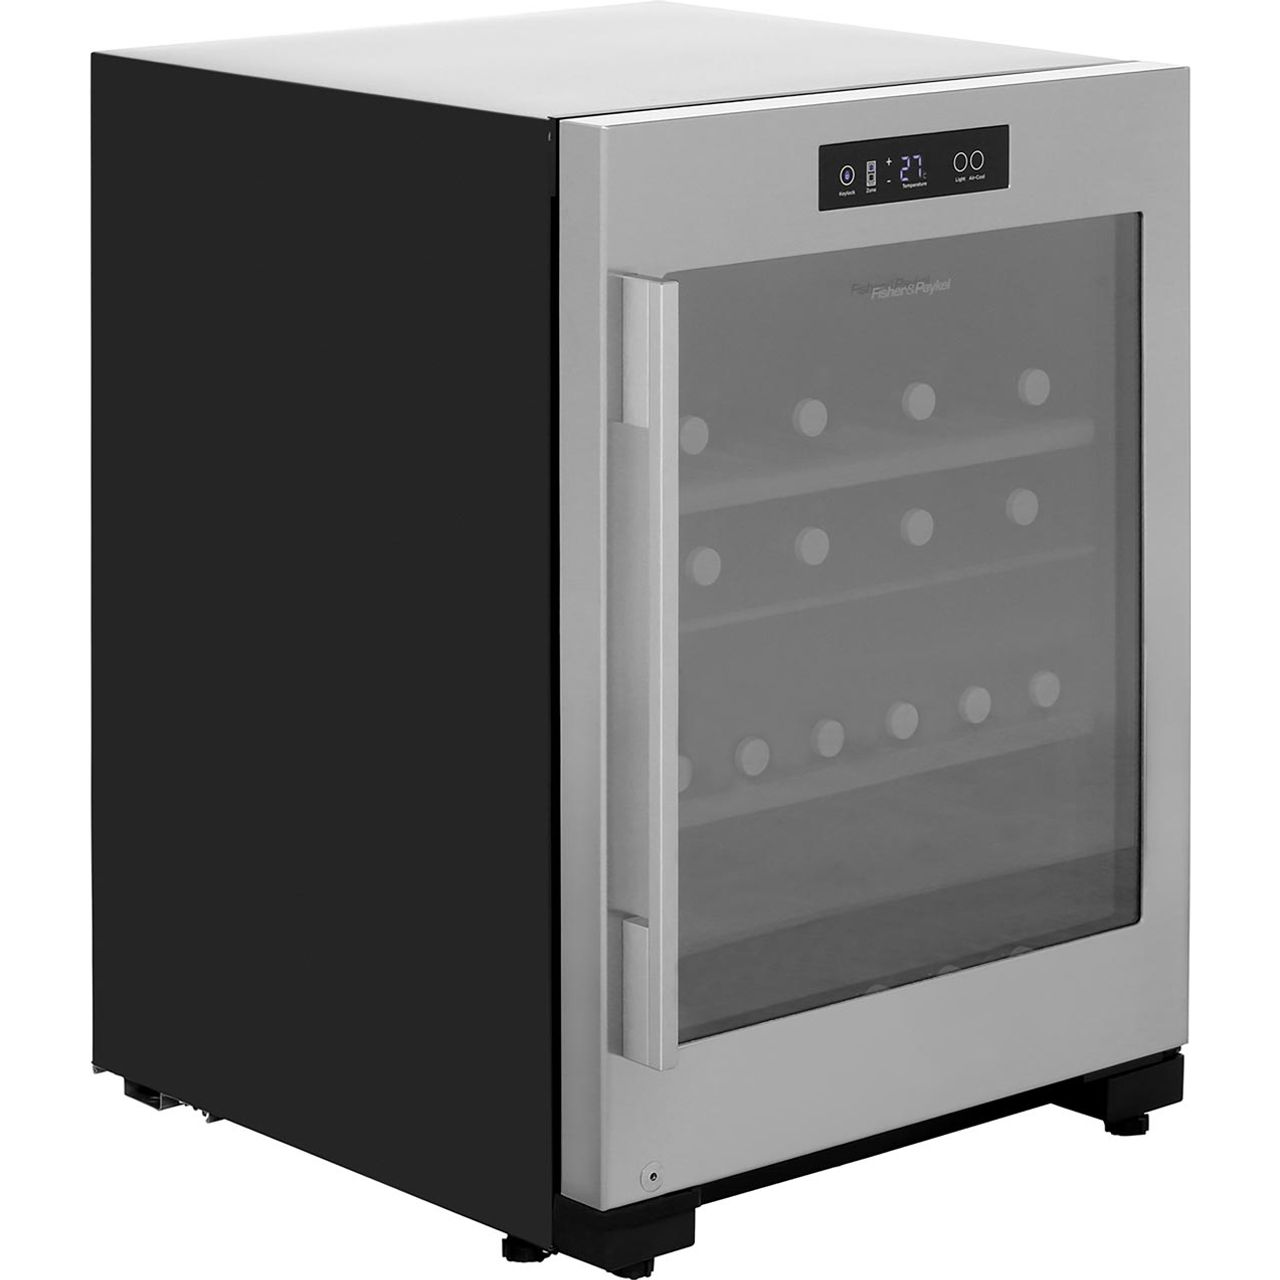 Fisher & Paykel RF106RDWX1 Wine Cooler Review